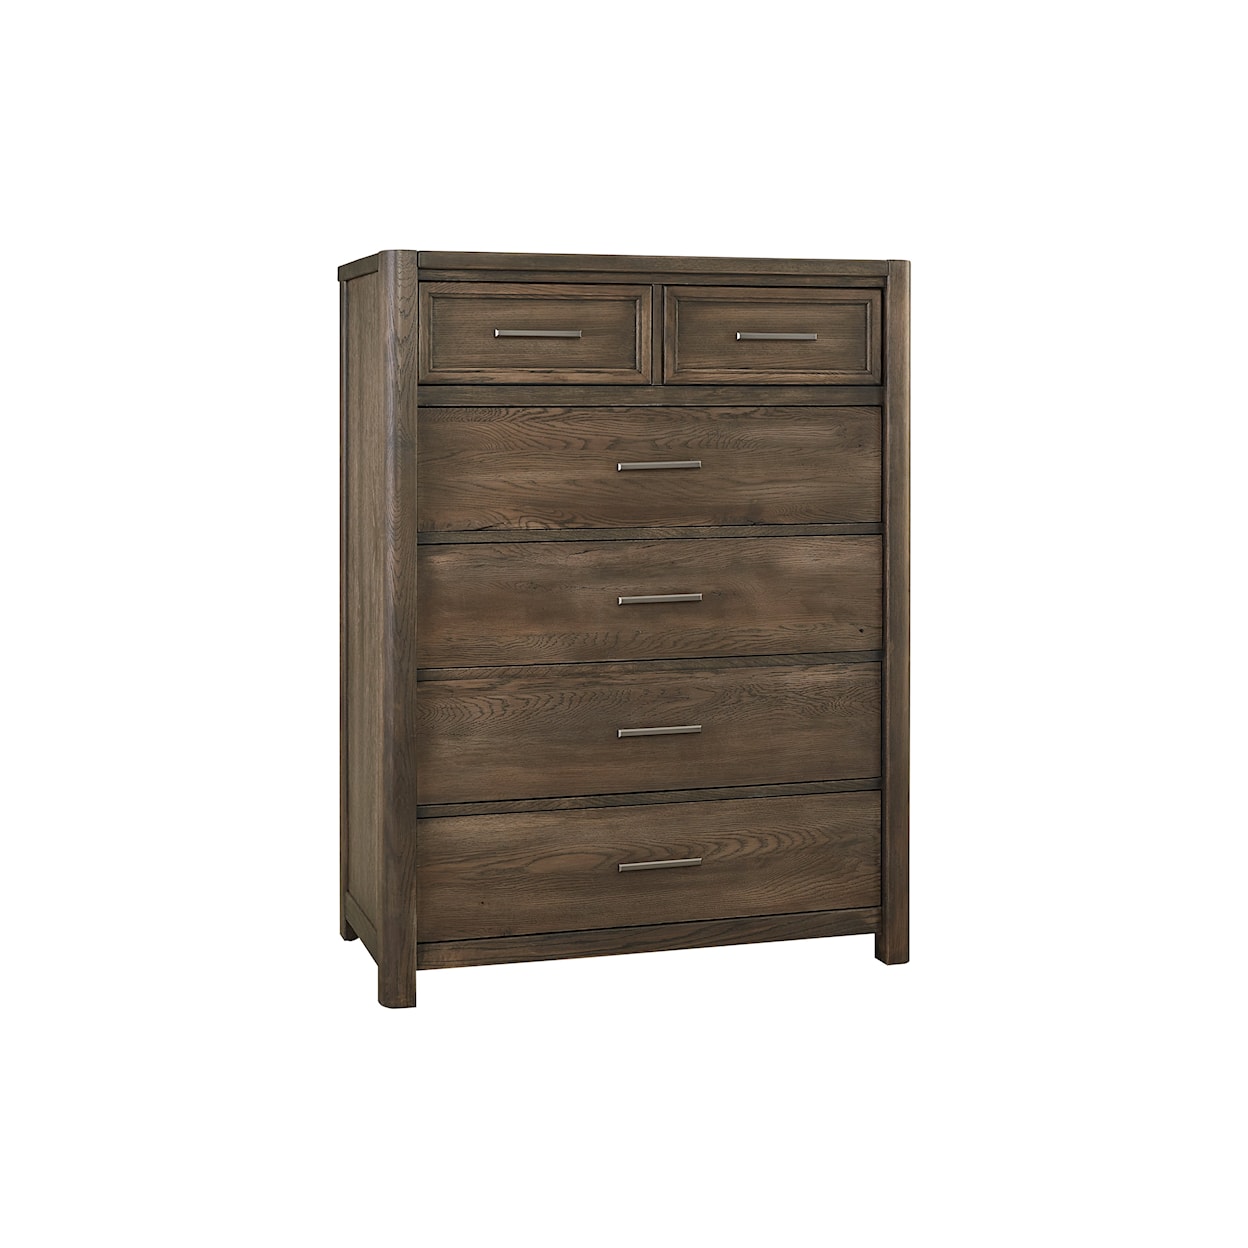 Vaughan Bassett Crafted Oak - Aged Grey 5-Drawer Bedroom Chest